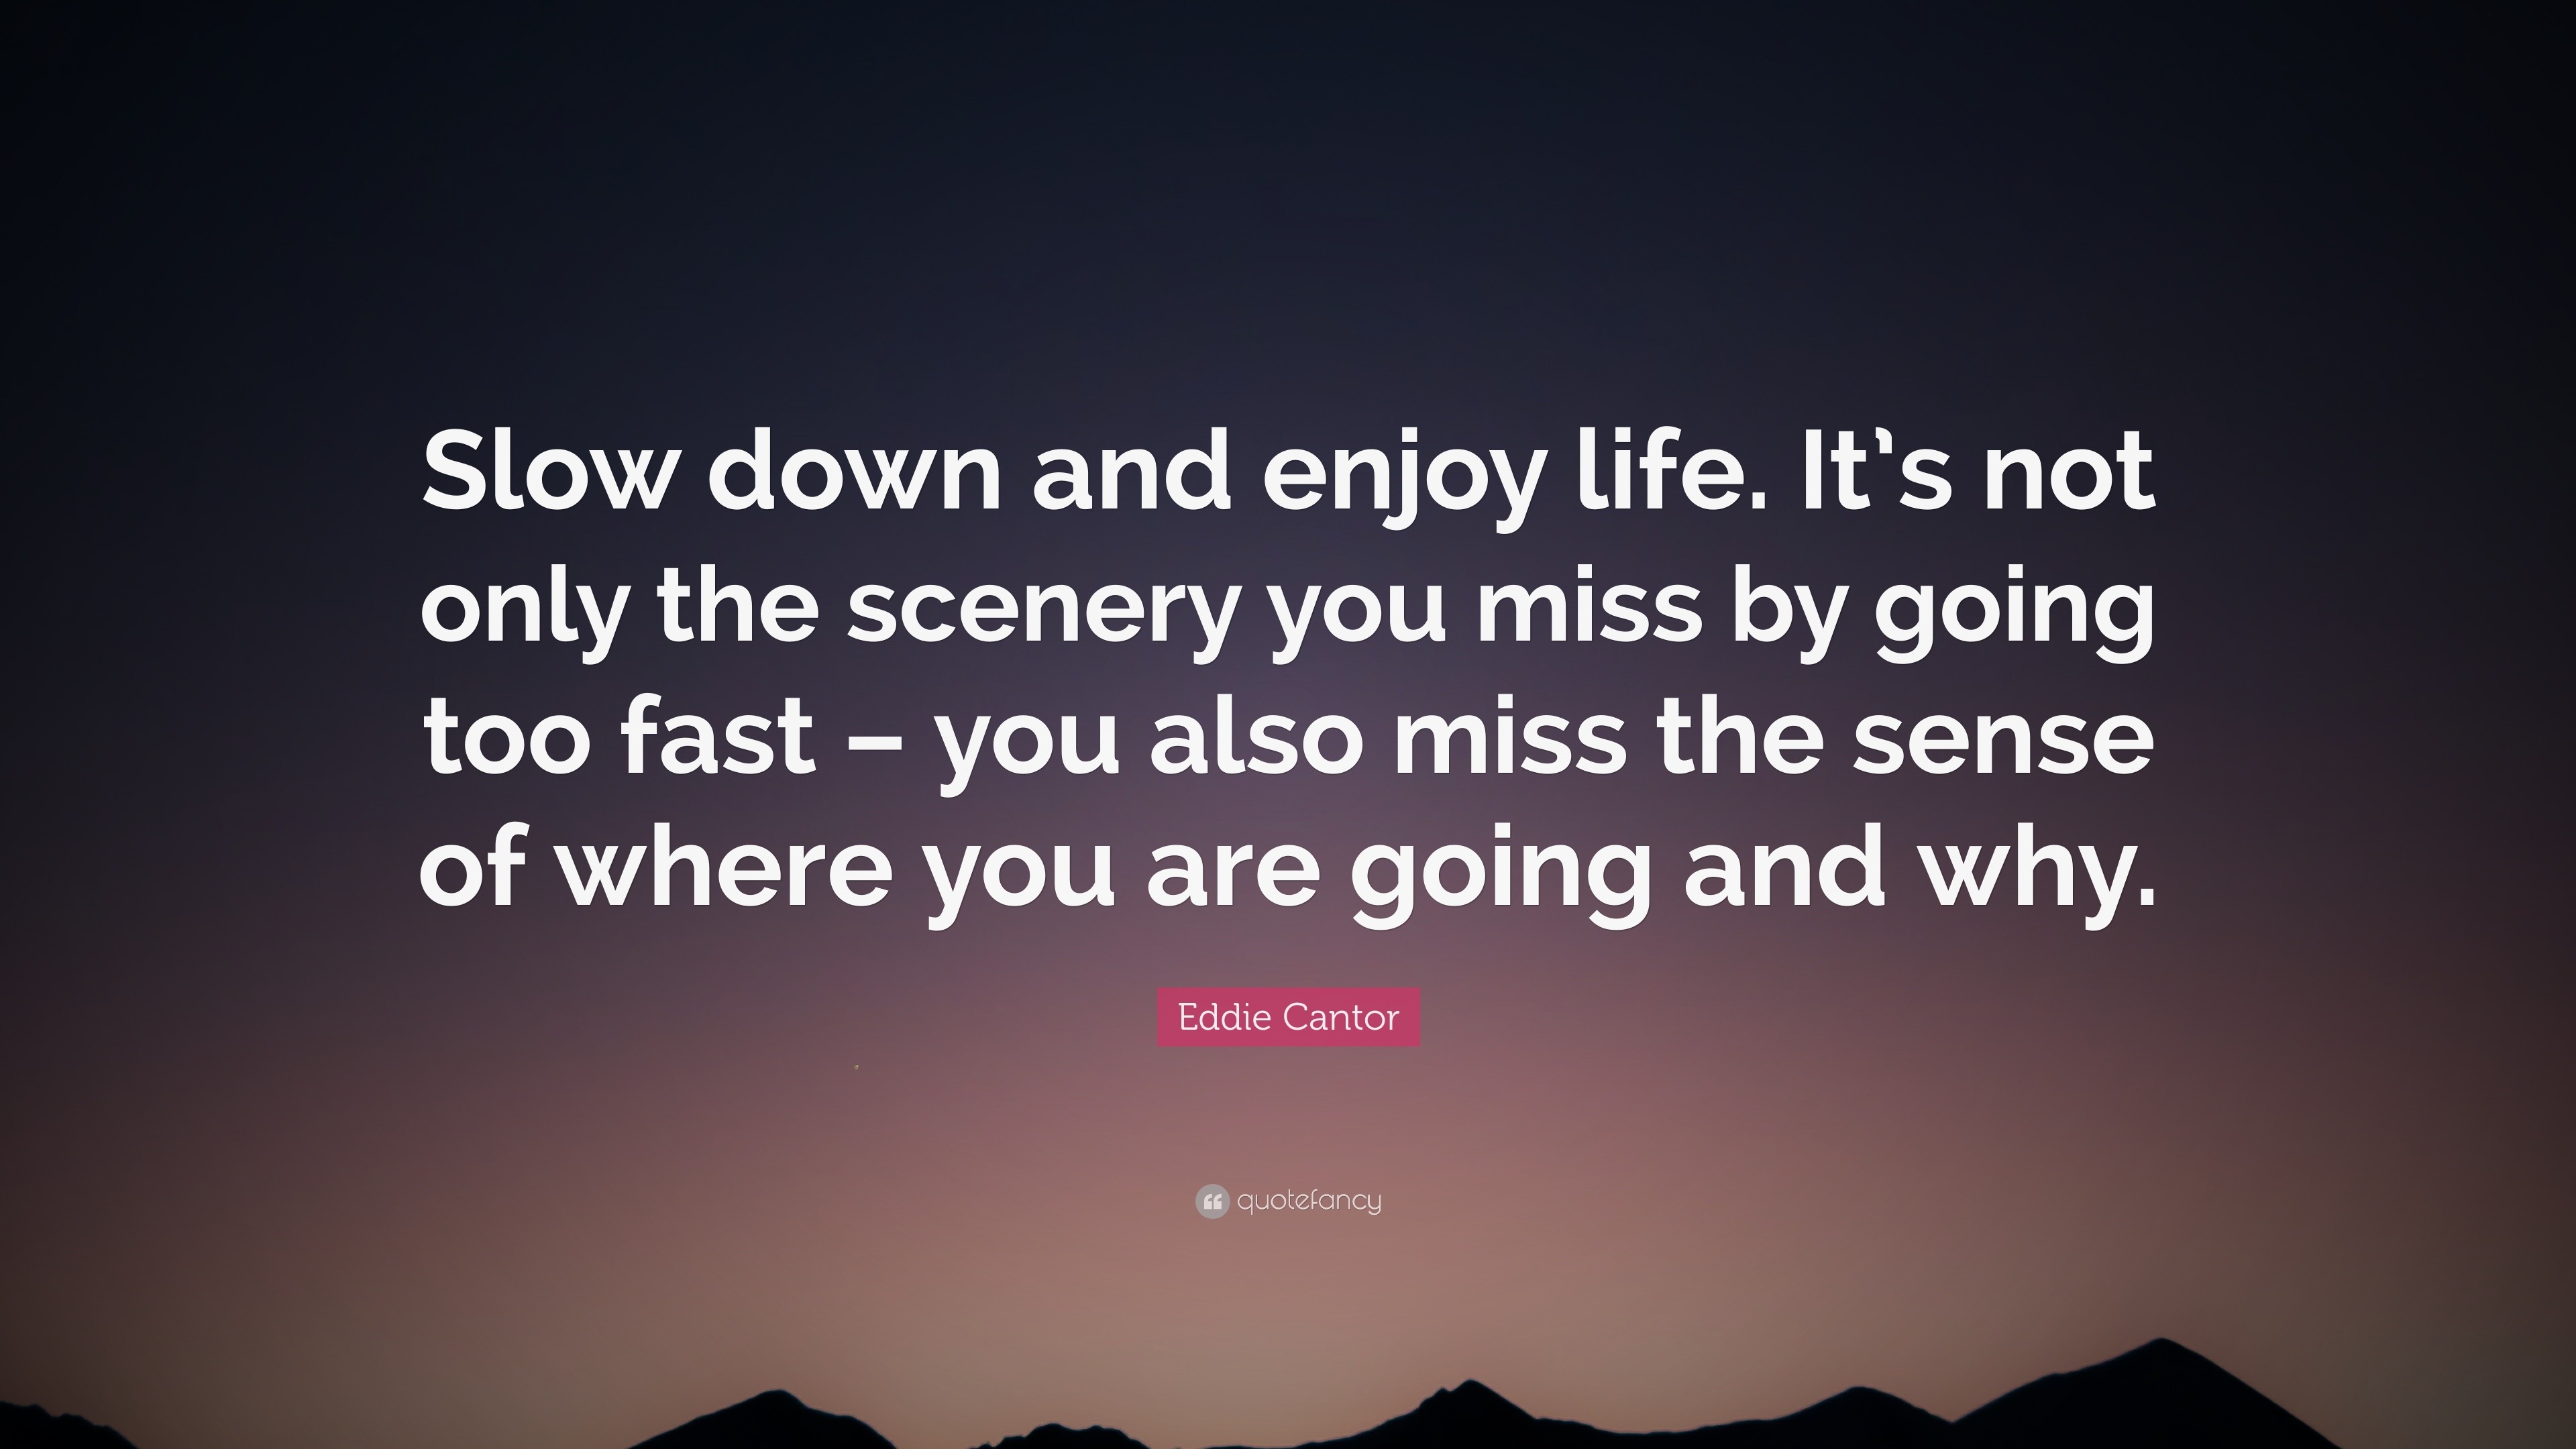 Ed Cantor Quote “Slow down and enjoy life It s not only the scenery